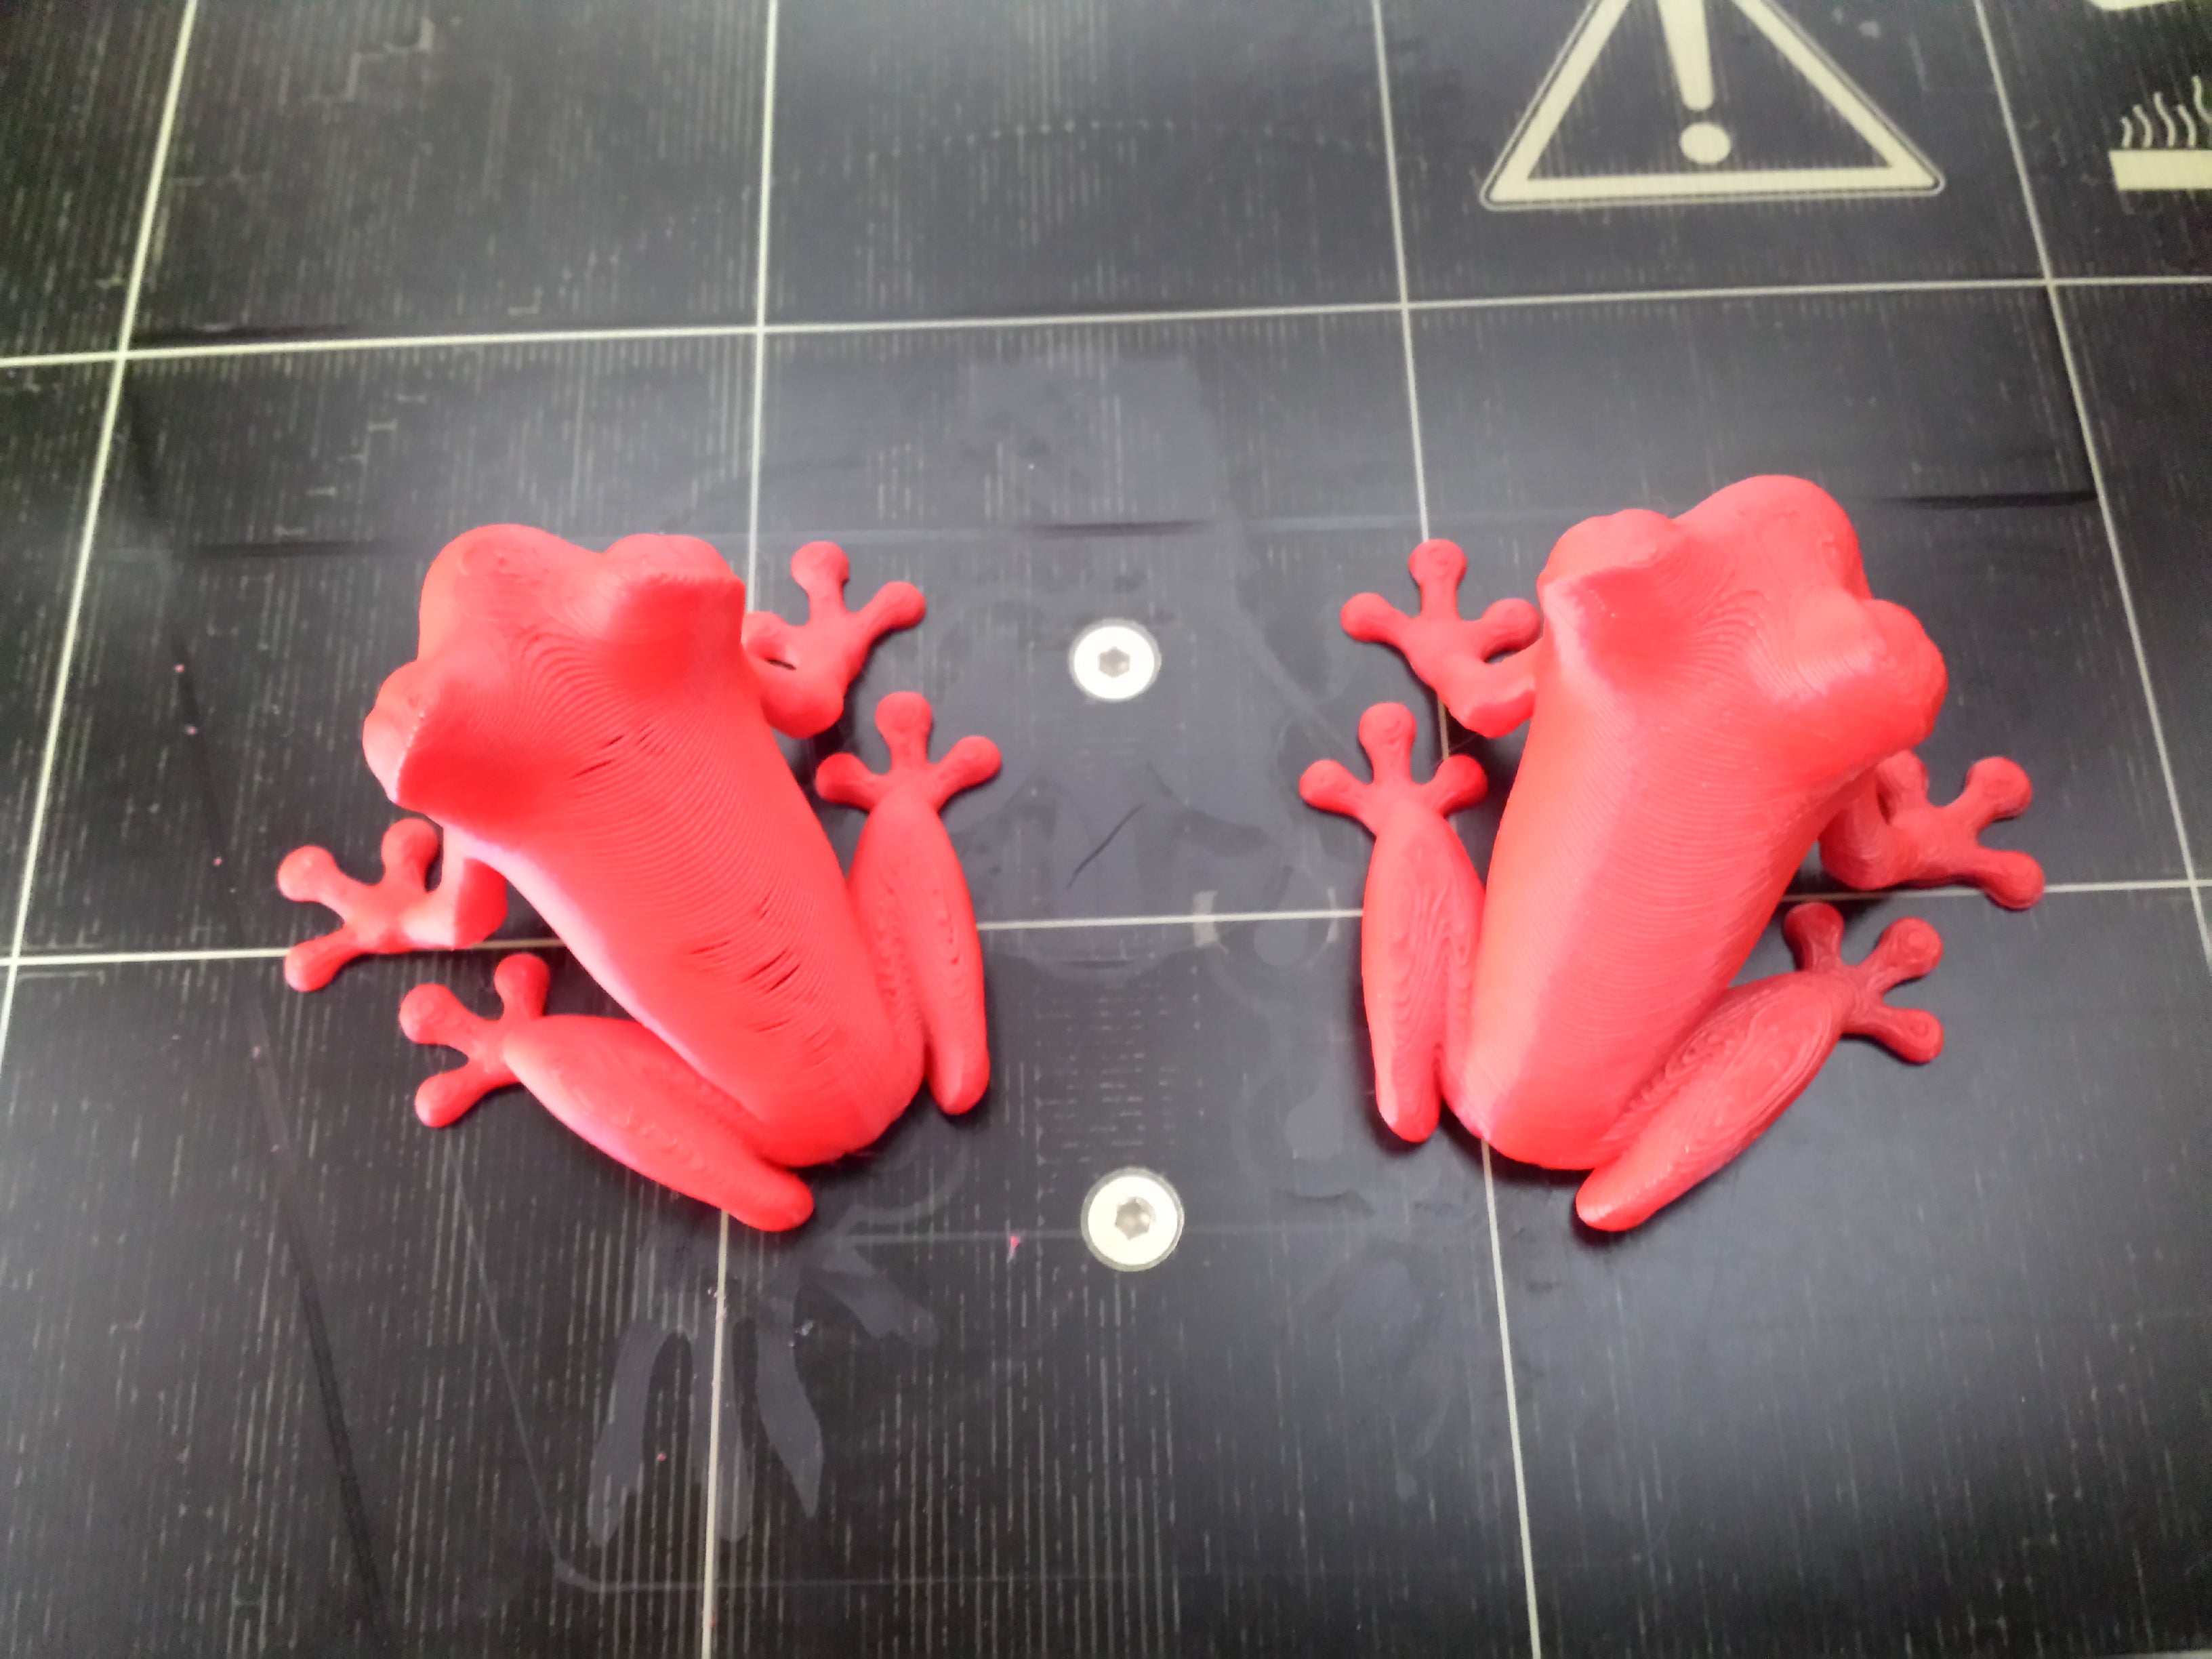 Picture of Treefrog comparison between two prints with Prusa i3 MK2 3D printer